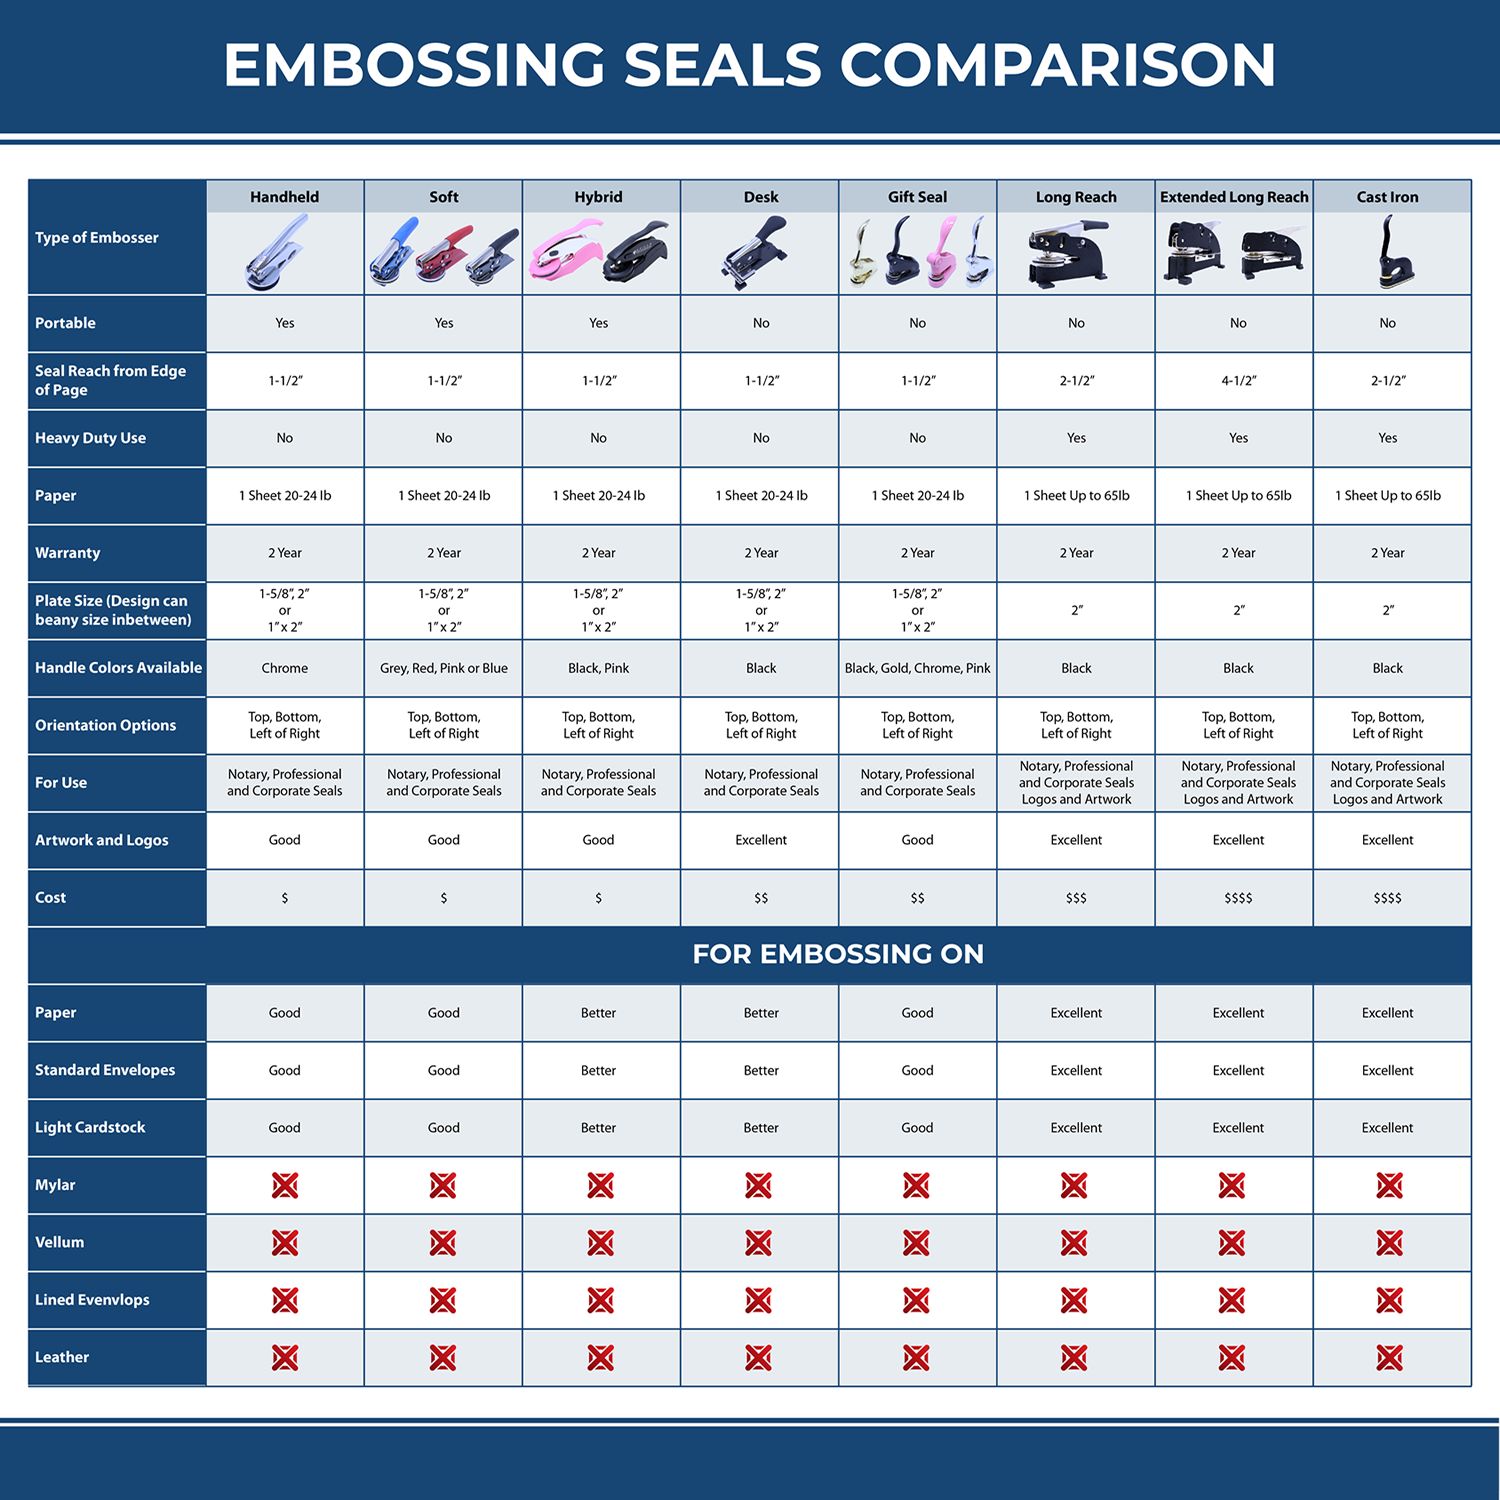 A comparison chart for the different types of mount models available for the Handheld Arkansas Architect Seal Embosser.